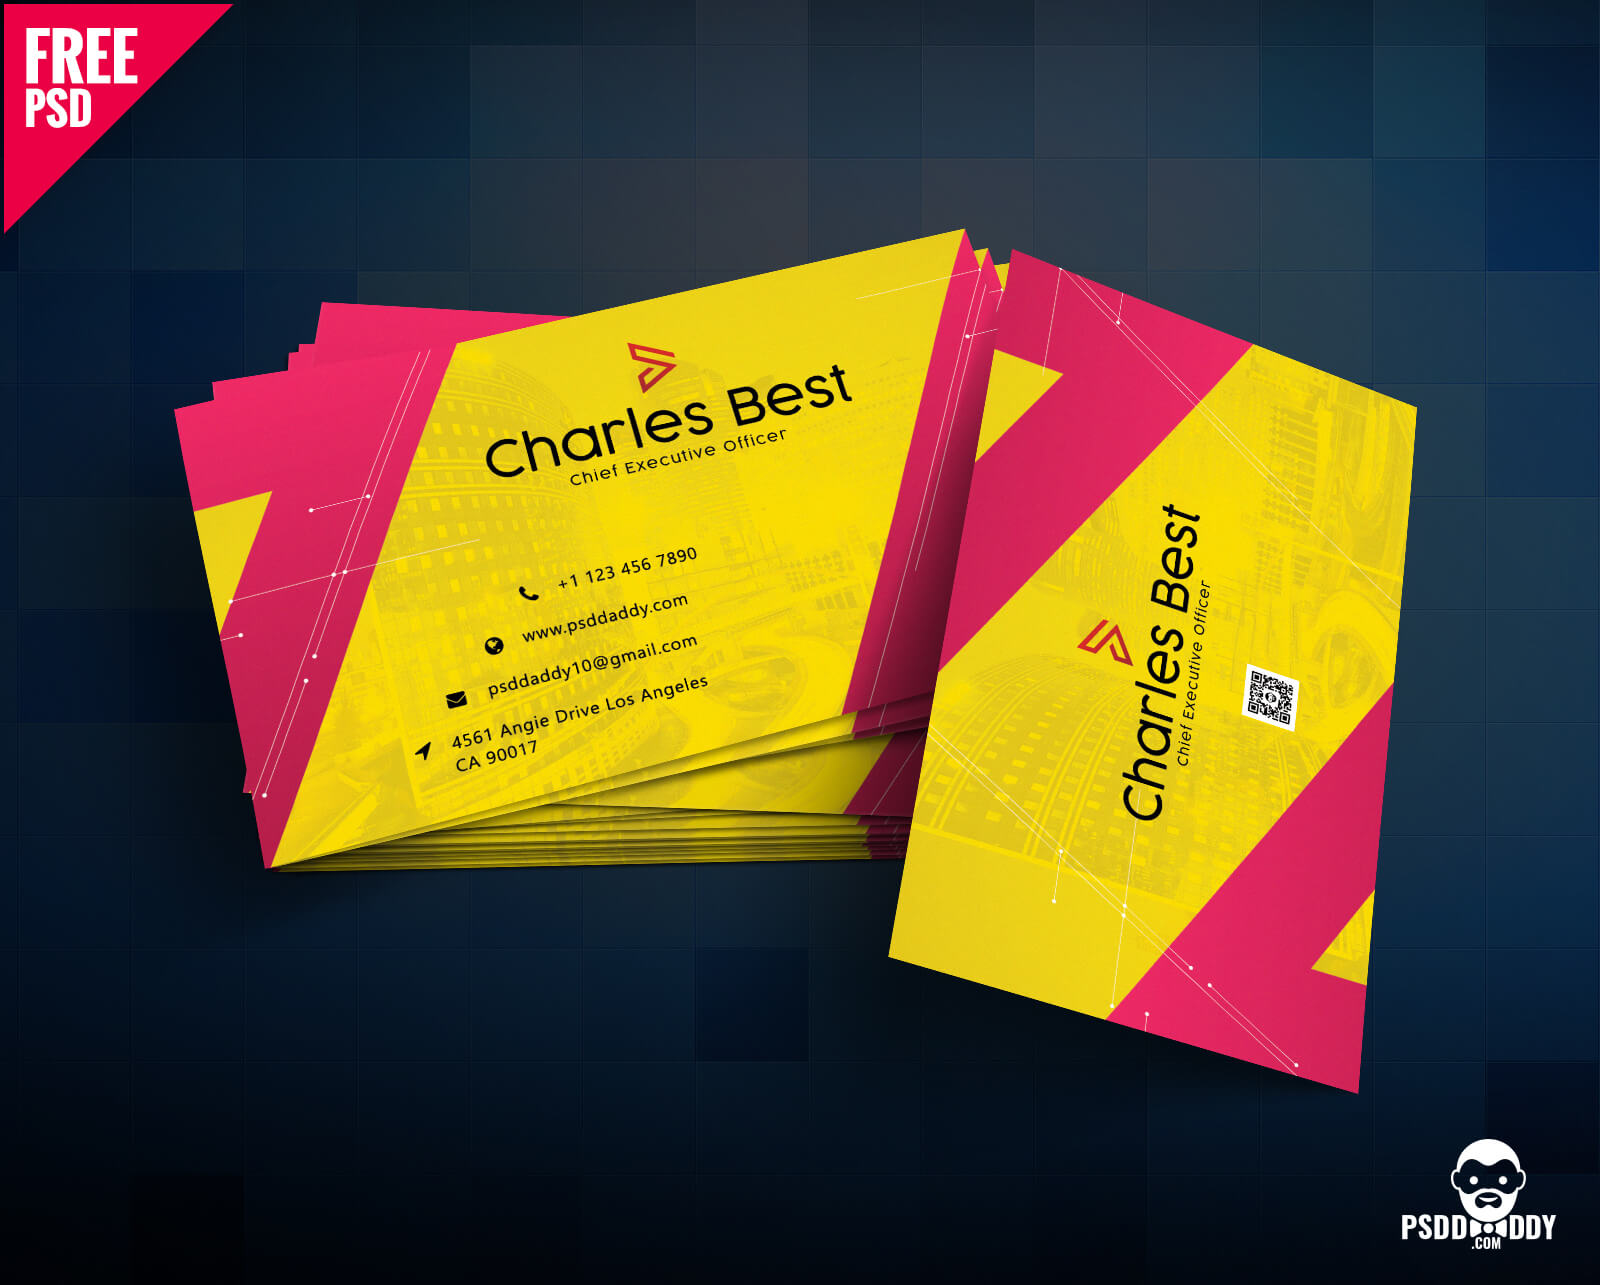 Download] Creative Business Card Free Psd | Psddaddy Within Business Card Template Photoshop Cs6